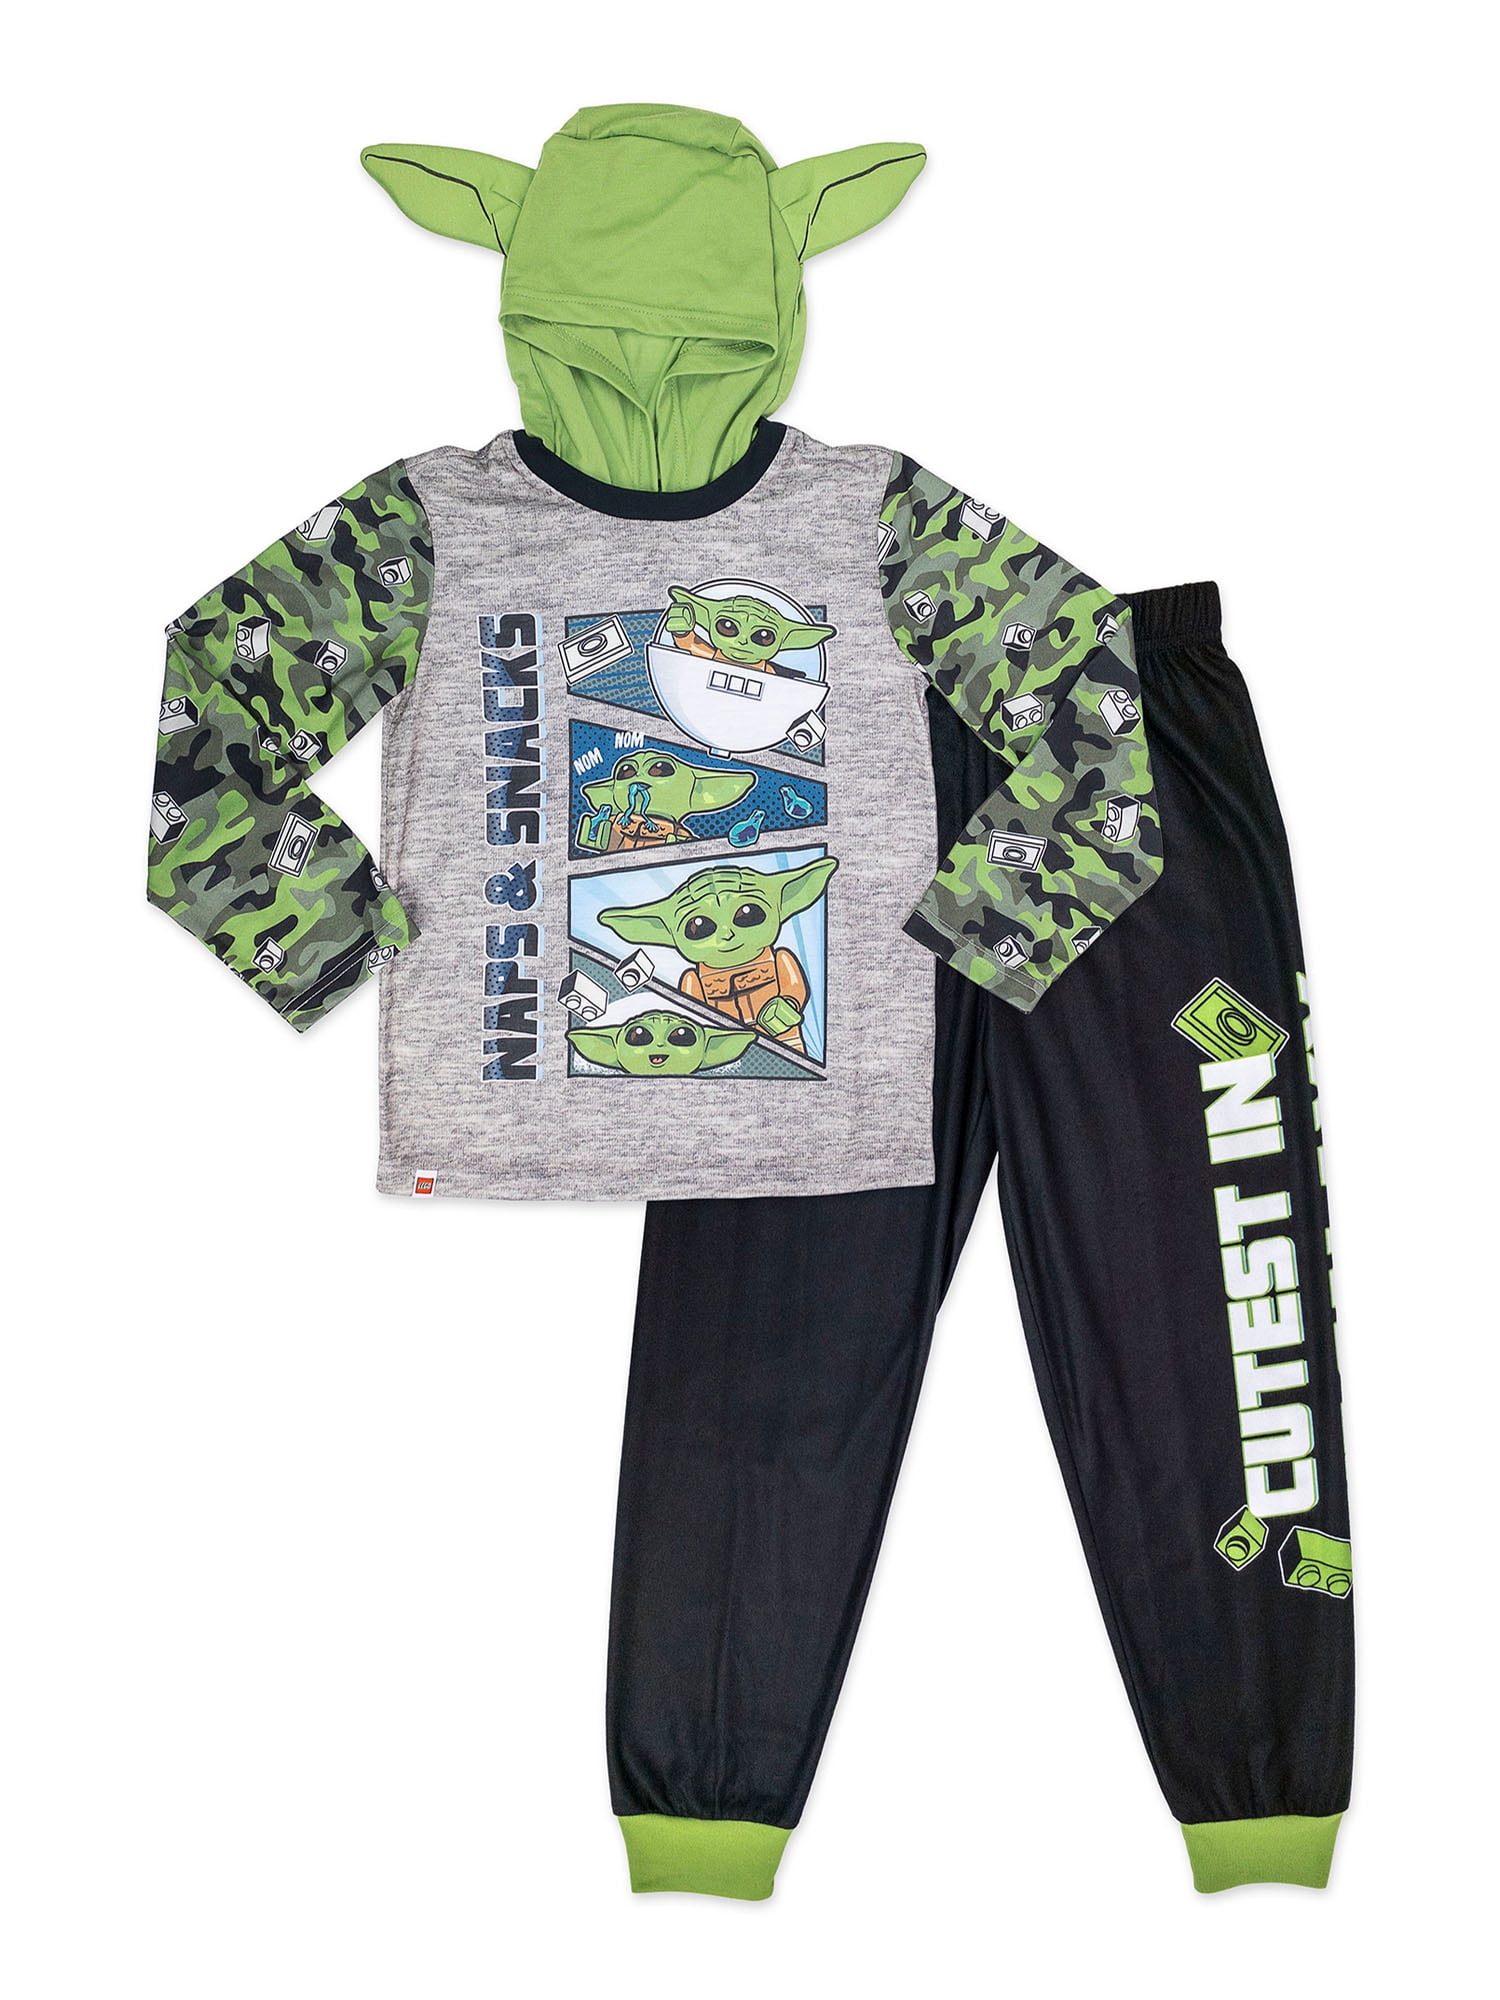 LEGO boys Long Sleeve and Jogger Pants 2-piece Outfit Set 